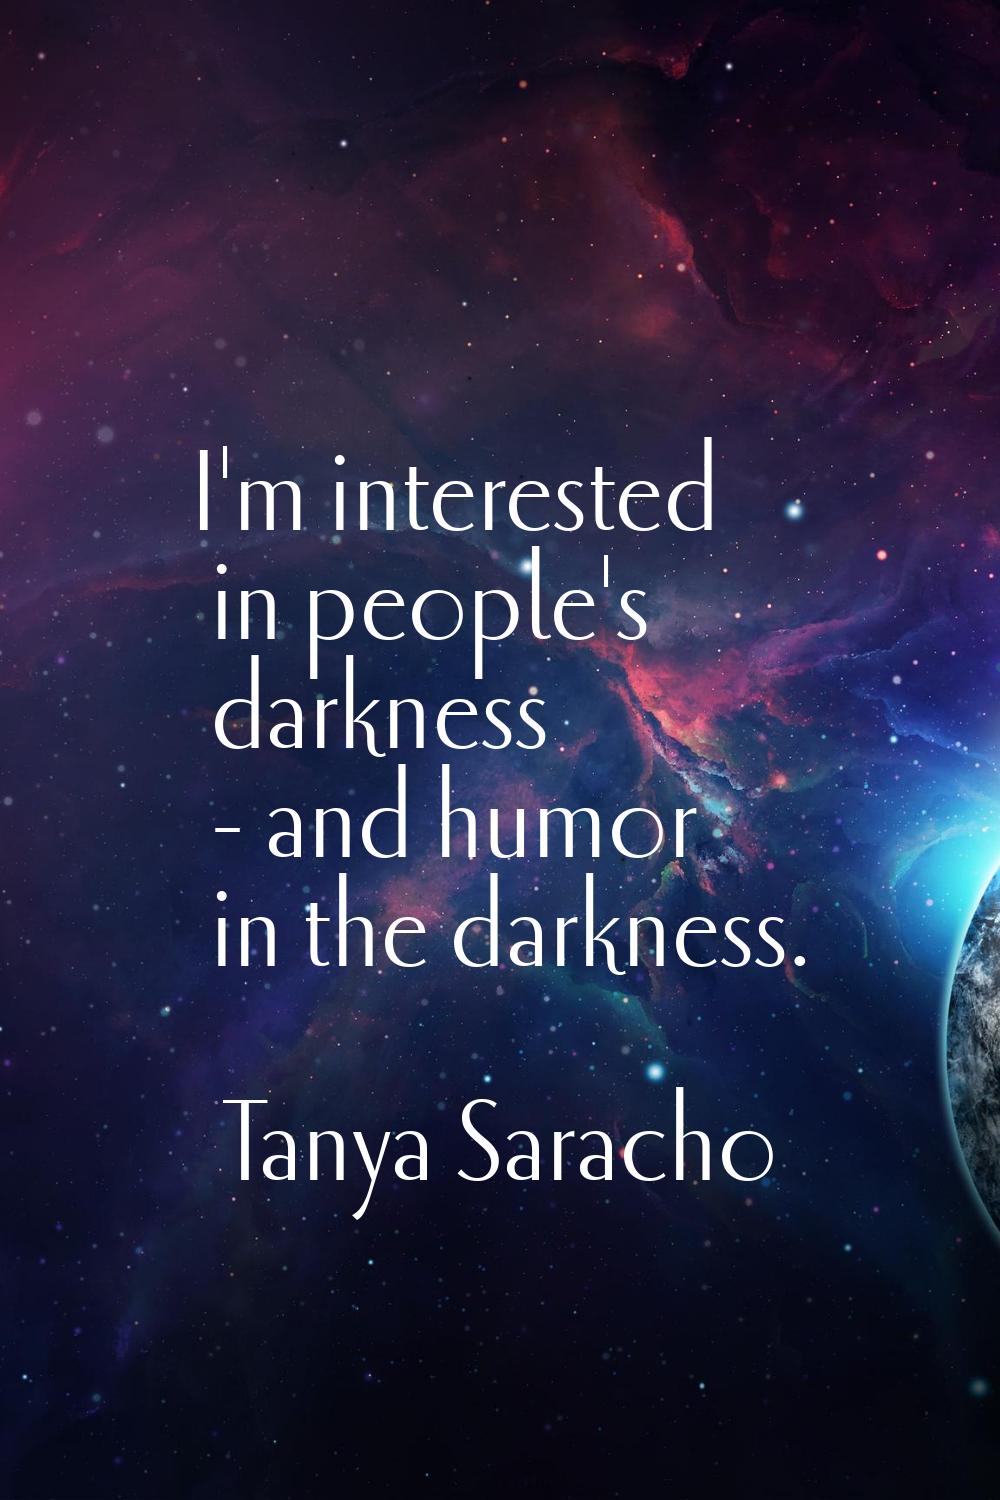 I'm interested in people's darkness - and humor in the darkness.